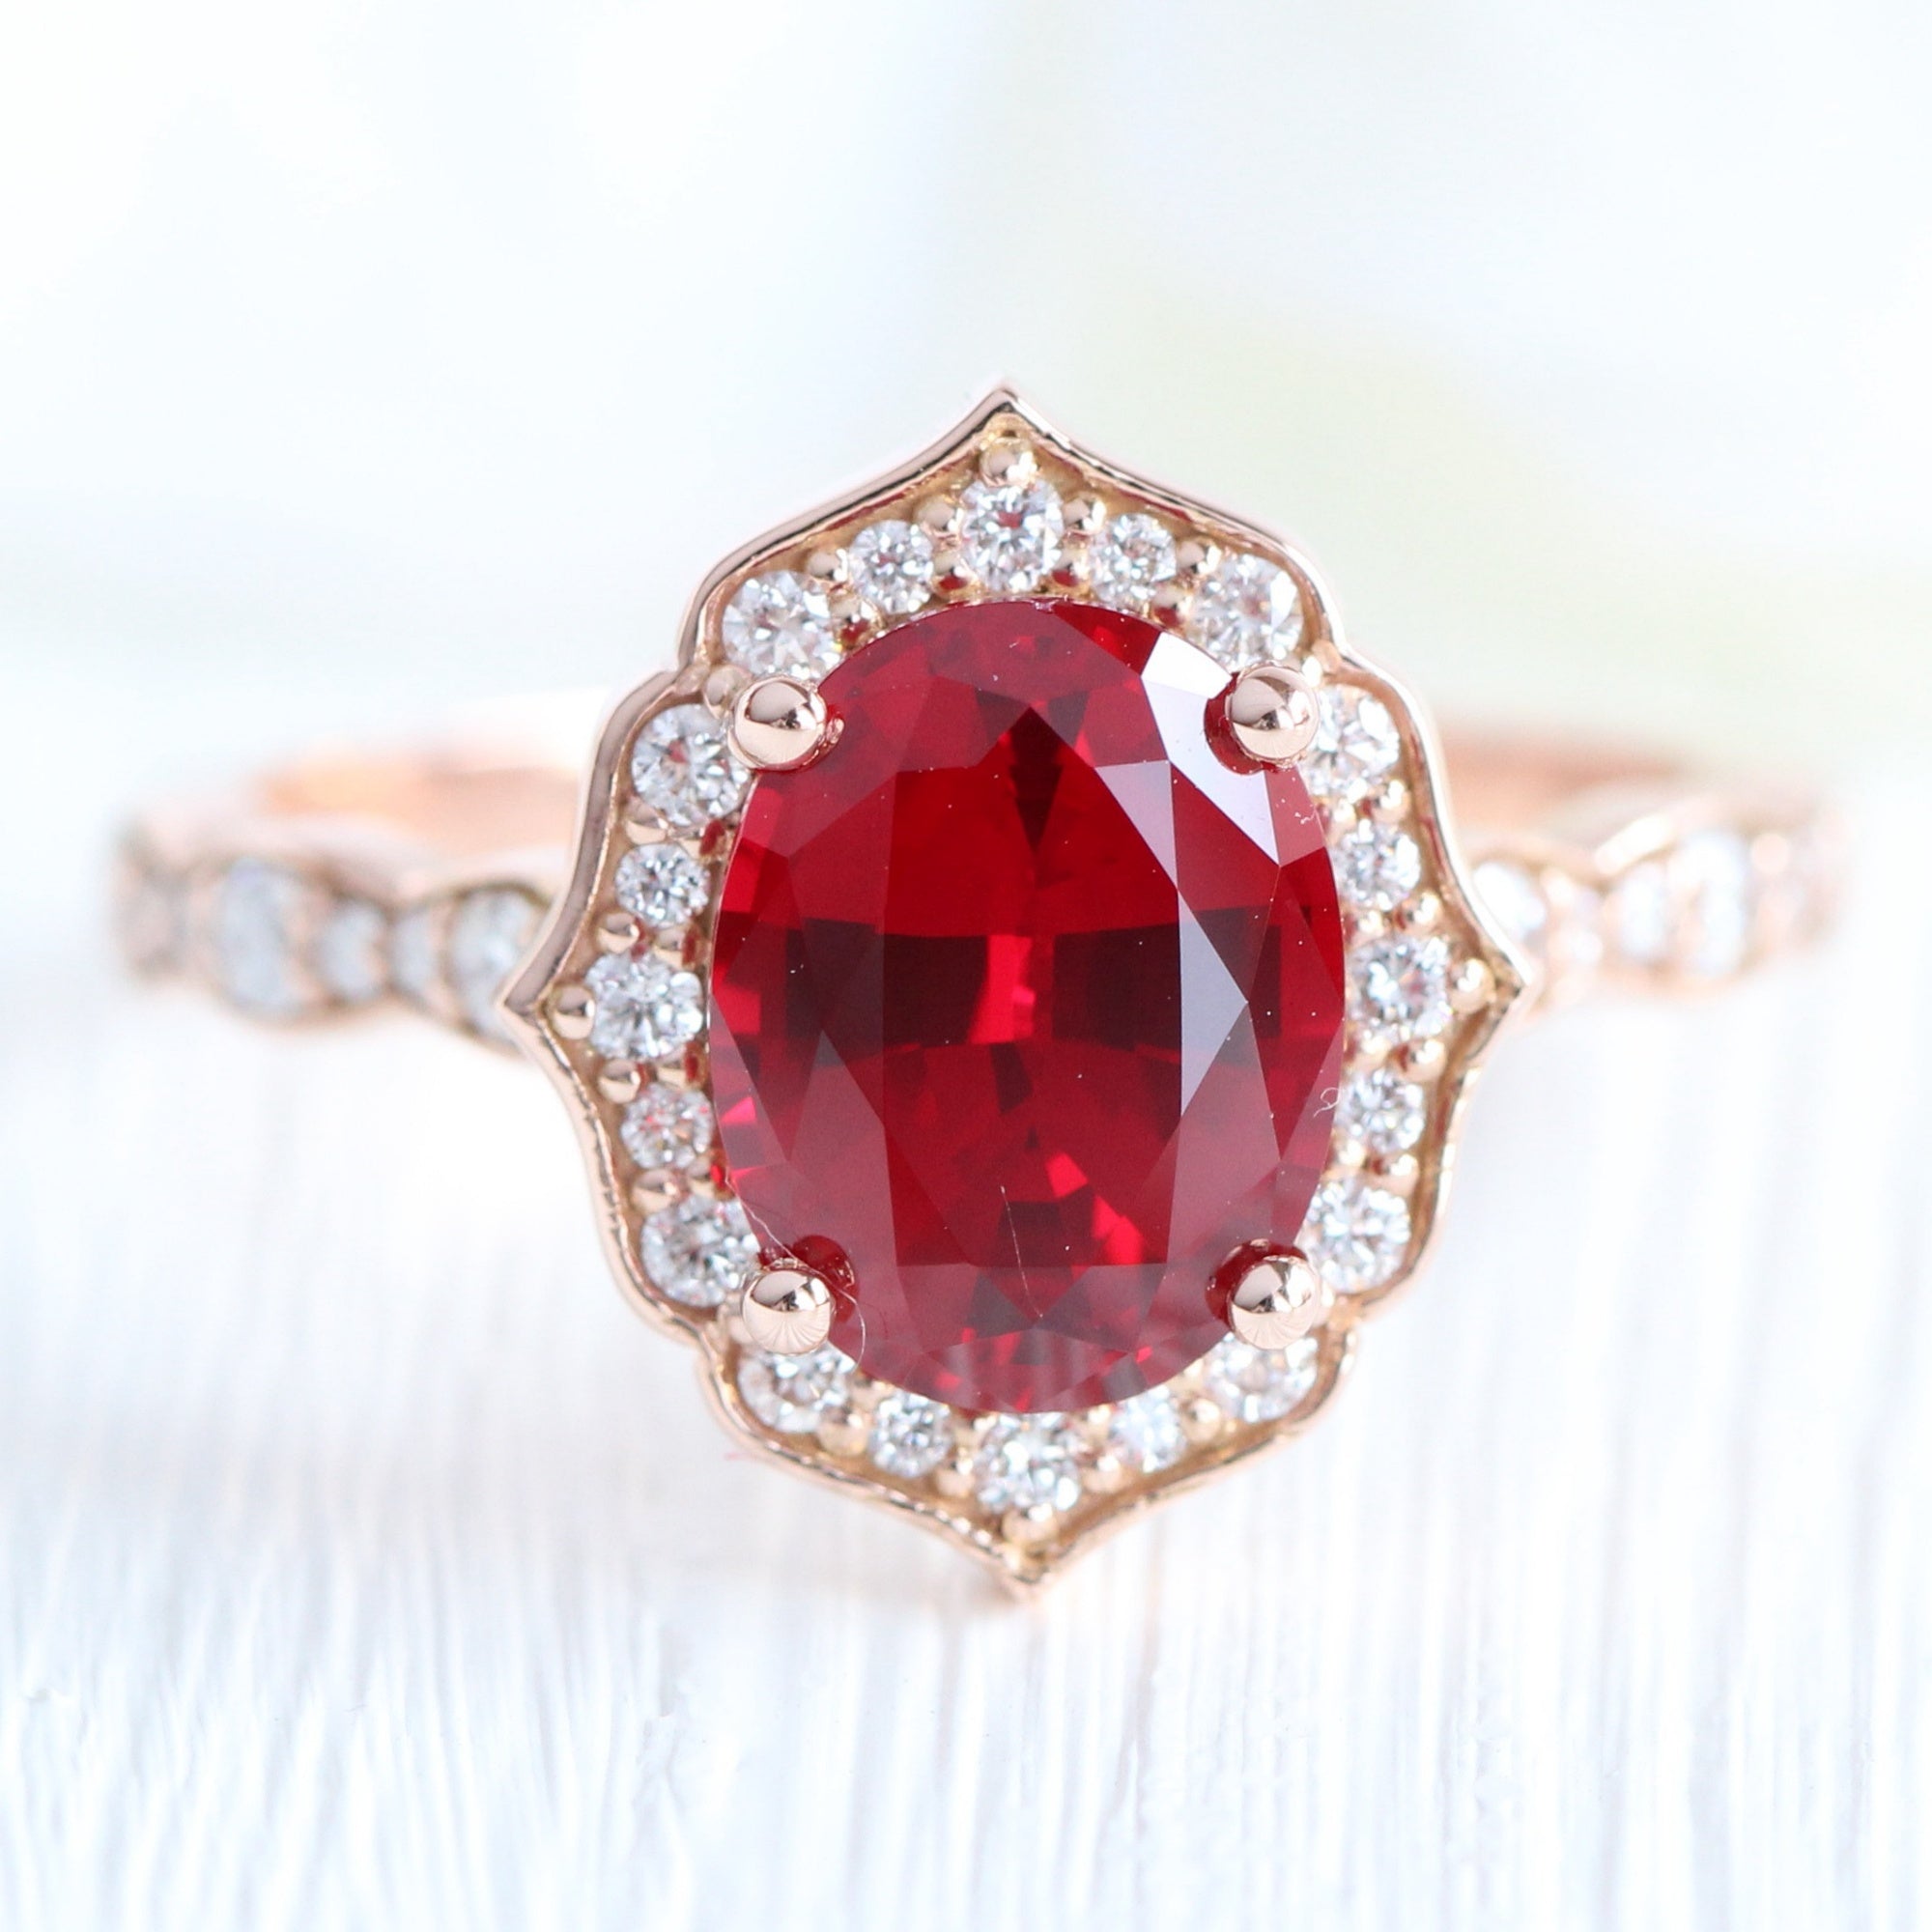 Large ruby engagement ring rose gold vintage halo diamond ruby ring la more design jewelry